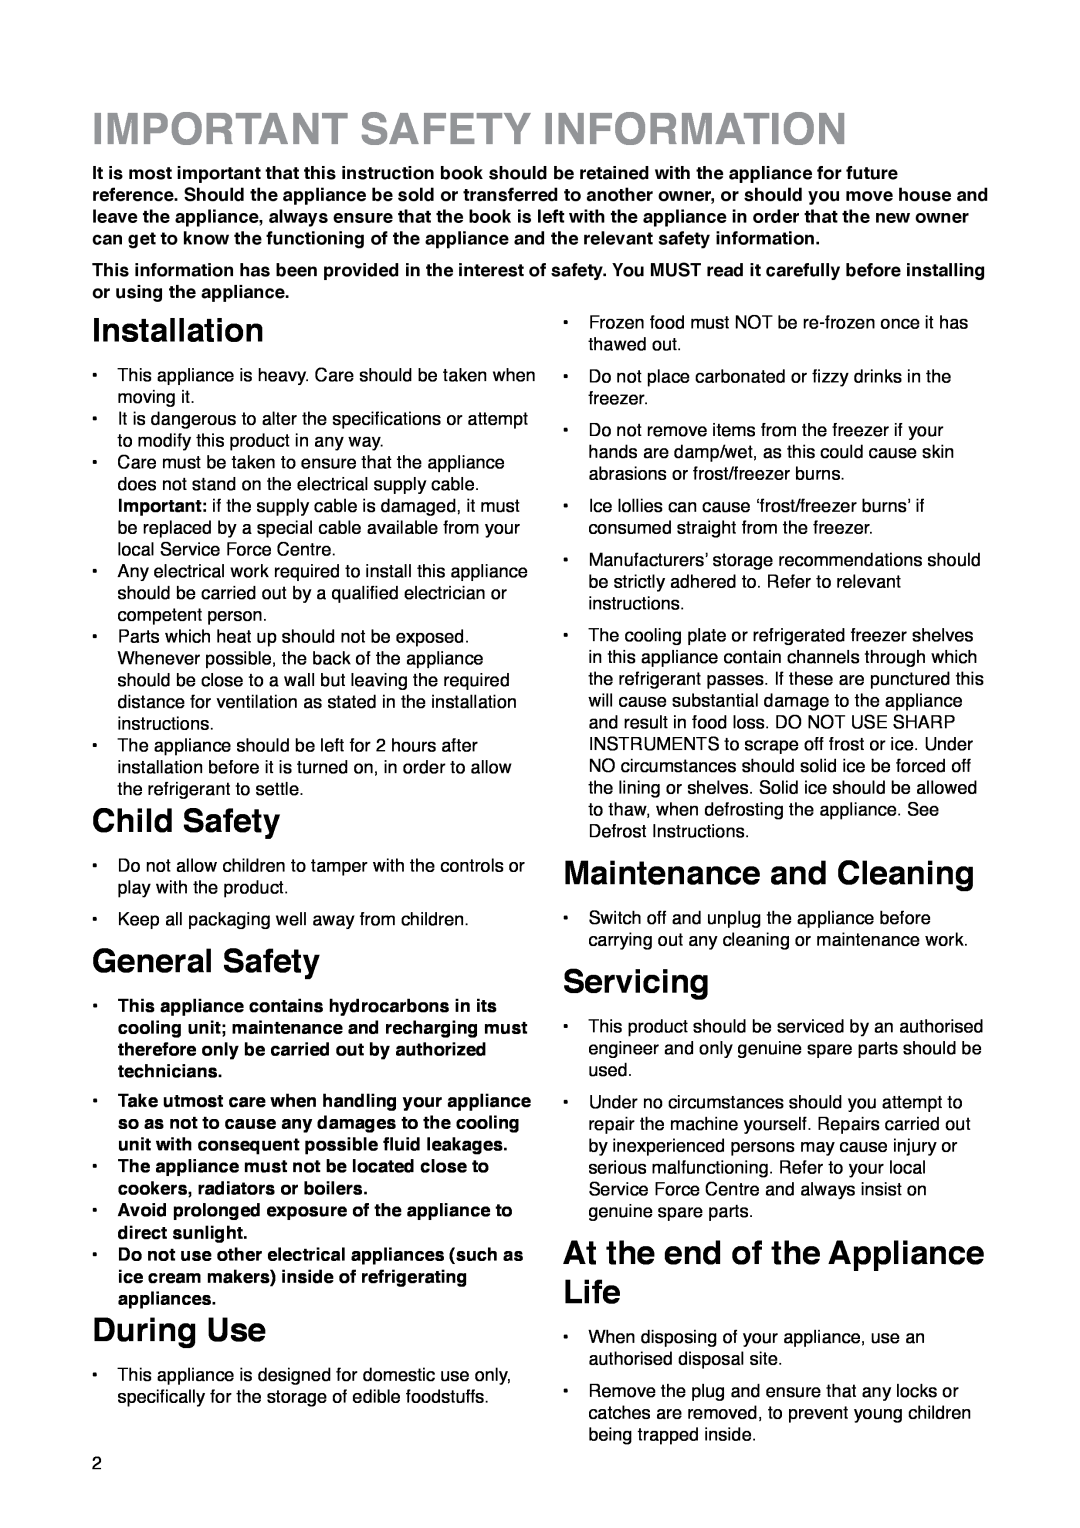 Zanussi ZKR 59/39 RN manual Important Safety Information, Installation, Child Safety, General Safety, During Use, Servicing 